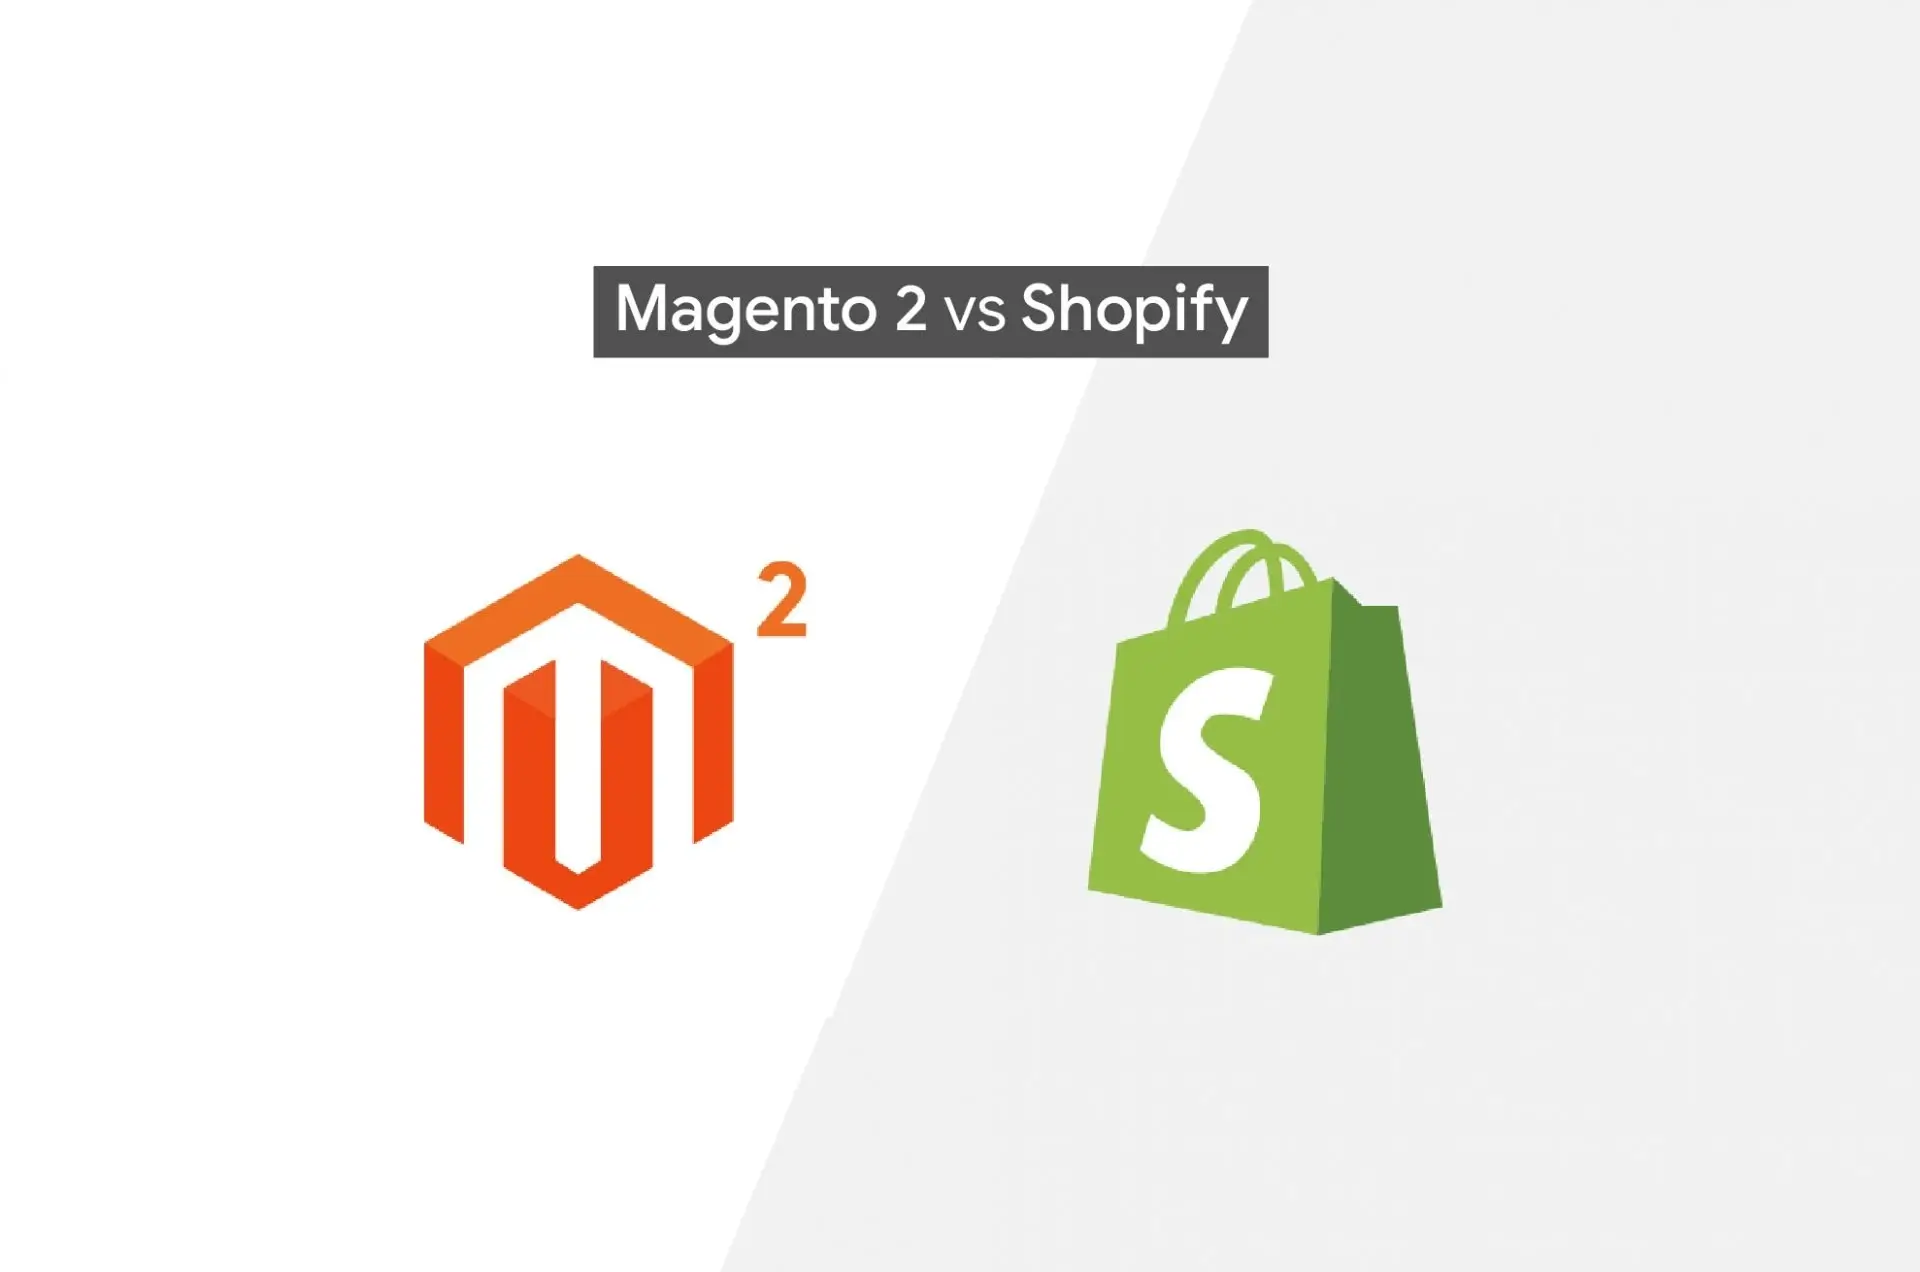 Magento vs Shopify: What is the better platform? Pros and cons of each platform